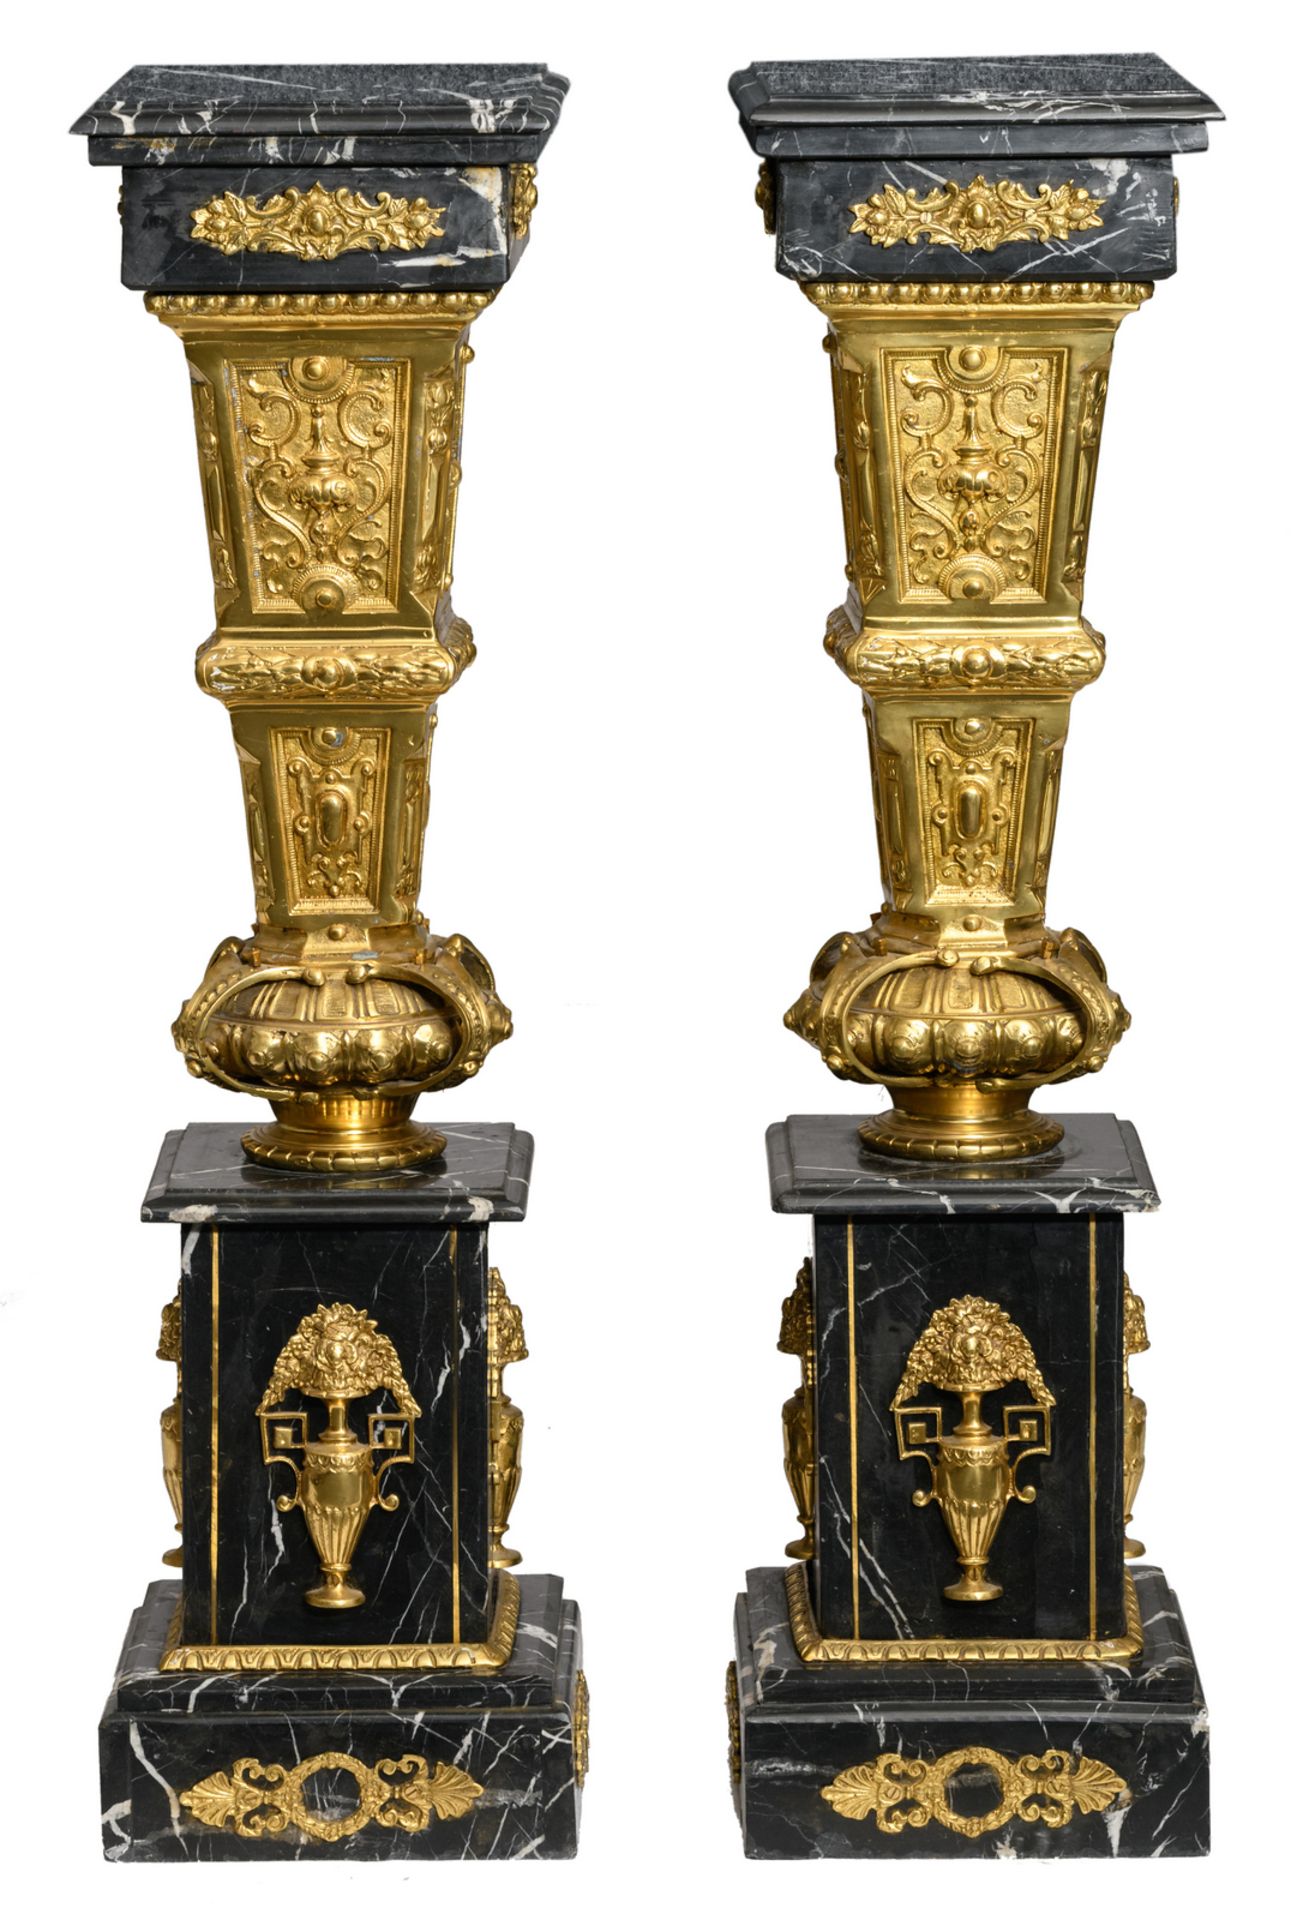 A pair of classicist inspired St. Anna marble gilt bronze mounted pedestals, H 113,5 cm